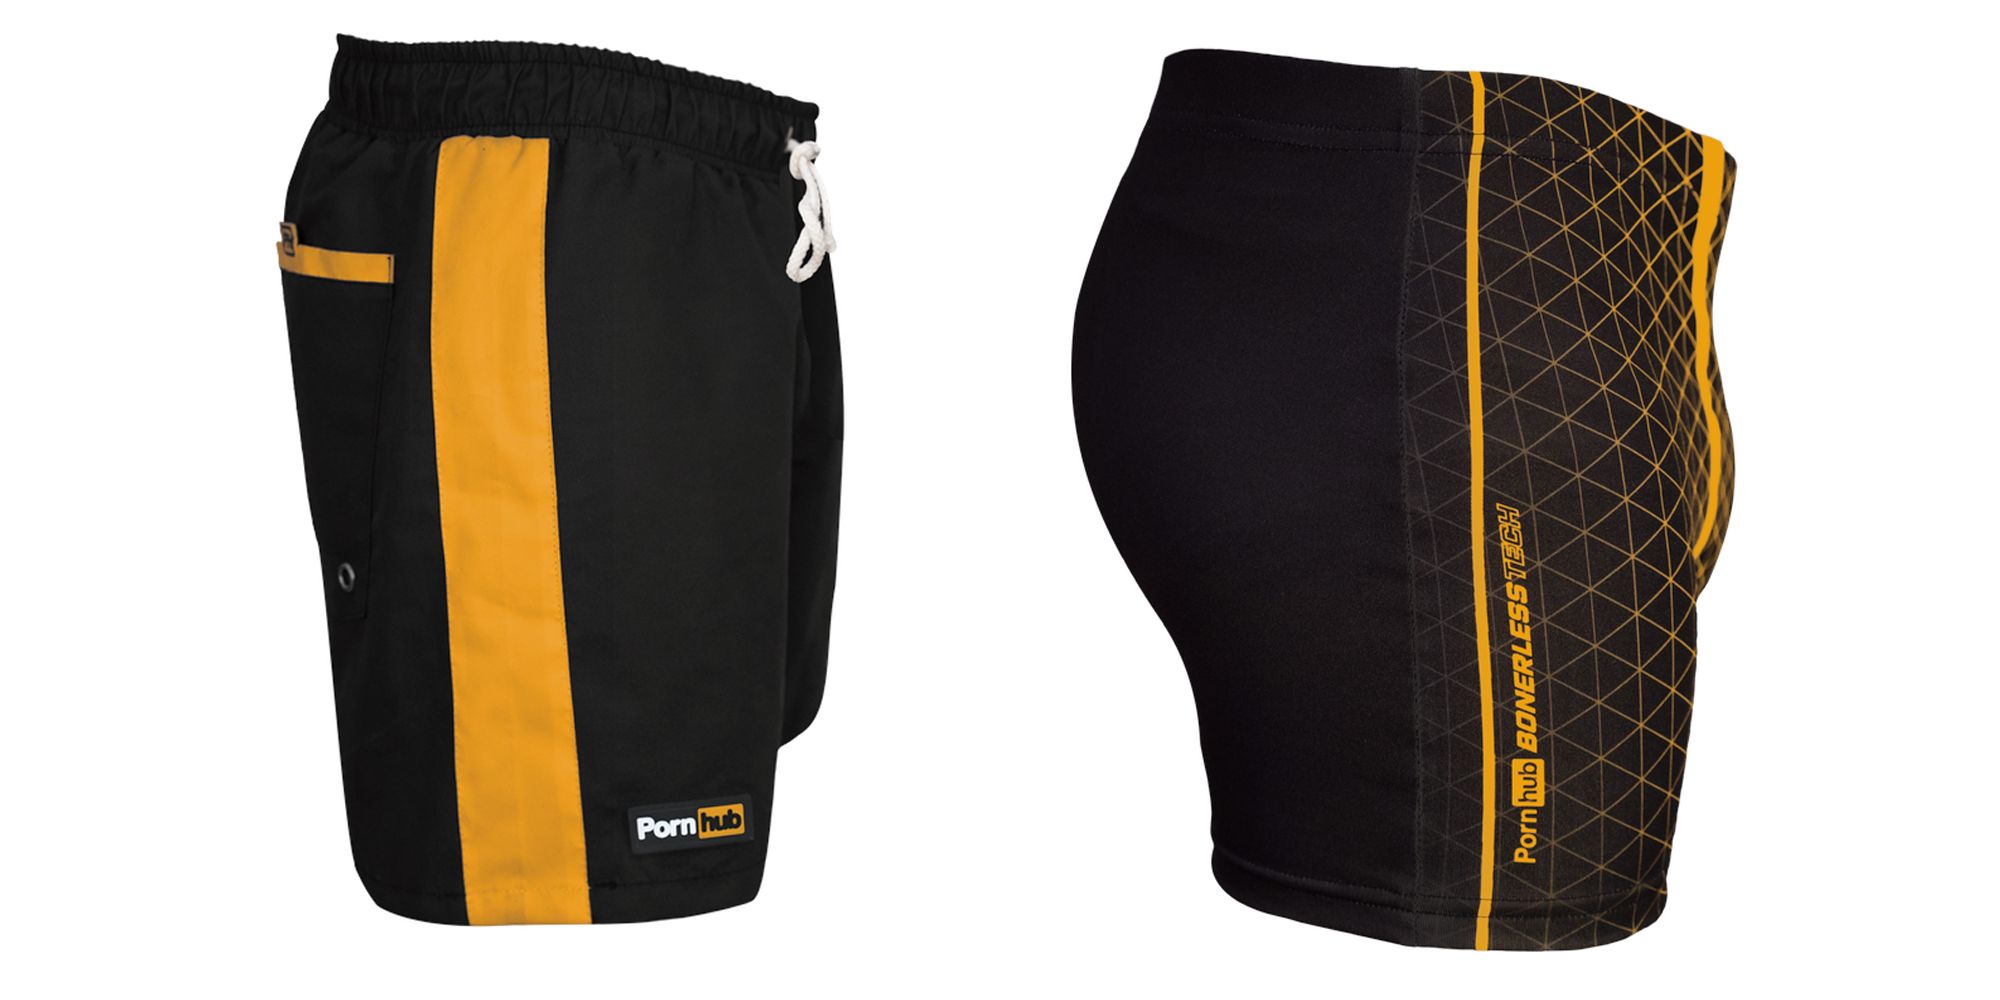 Pornhub Has Released Swimming Trunks Swimming Shorts That Hide Erections st...